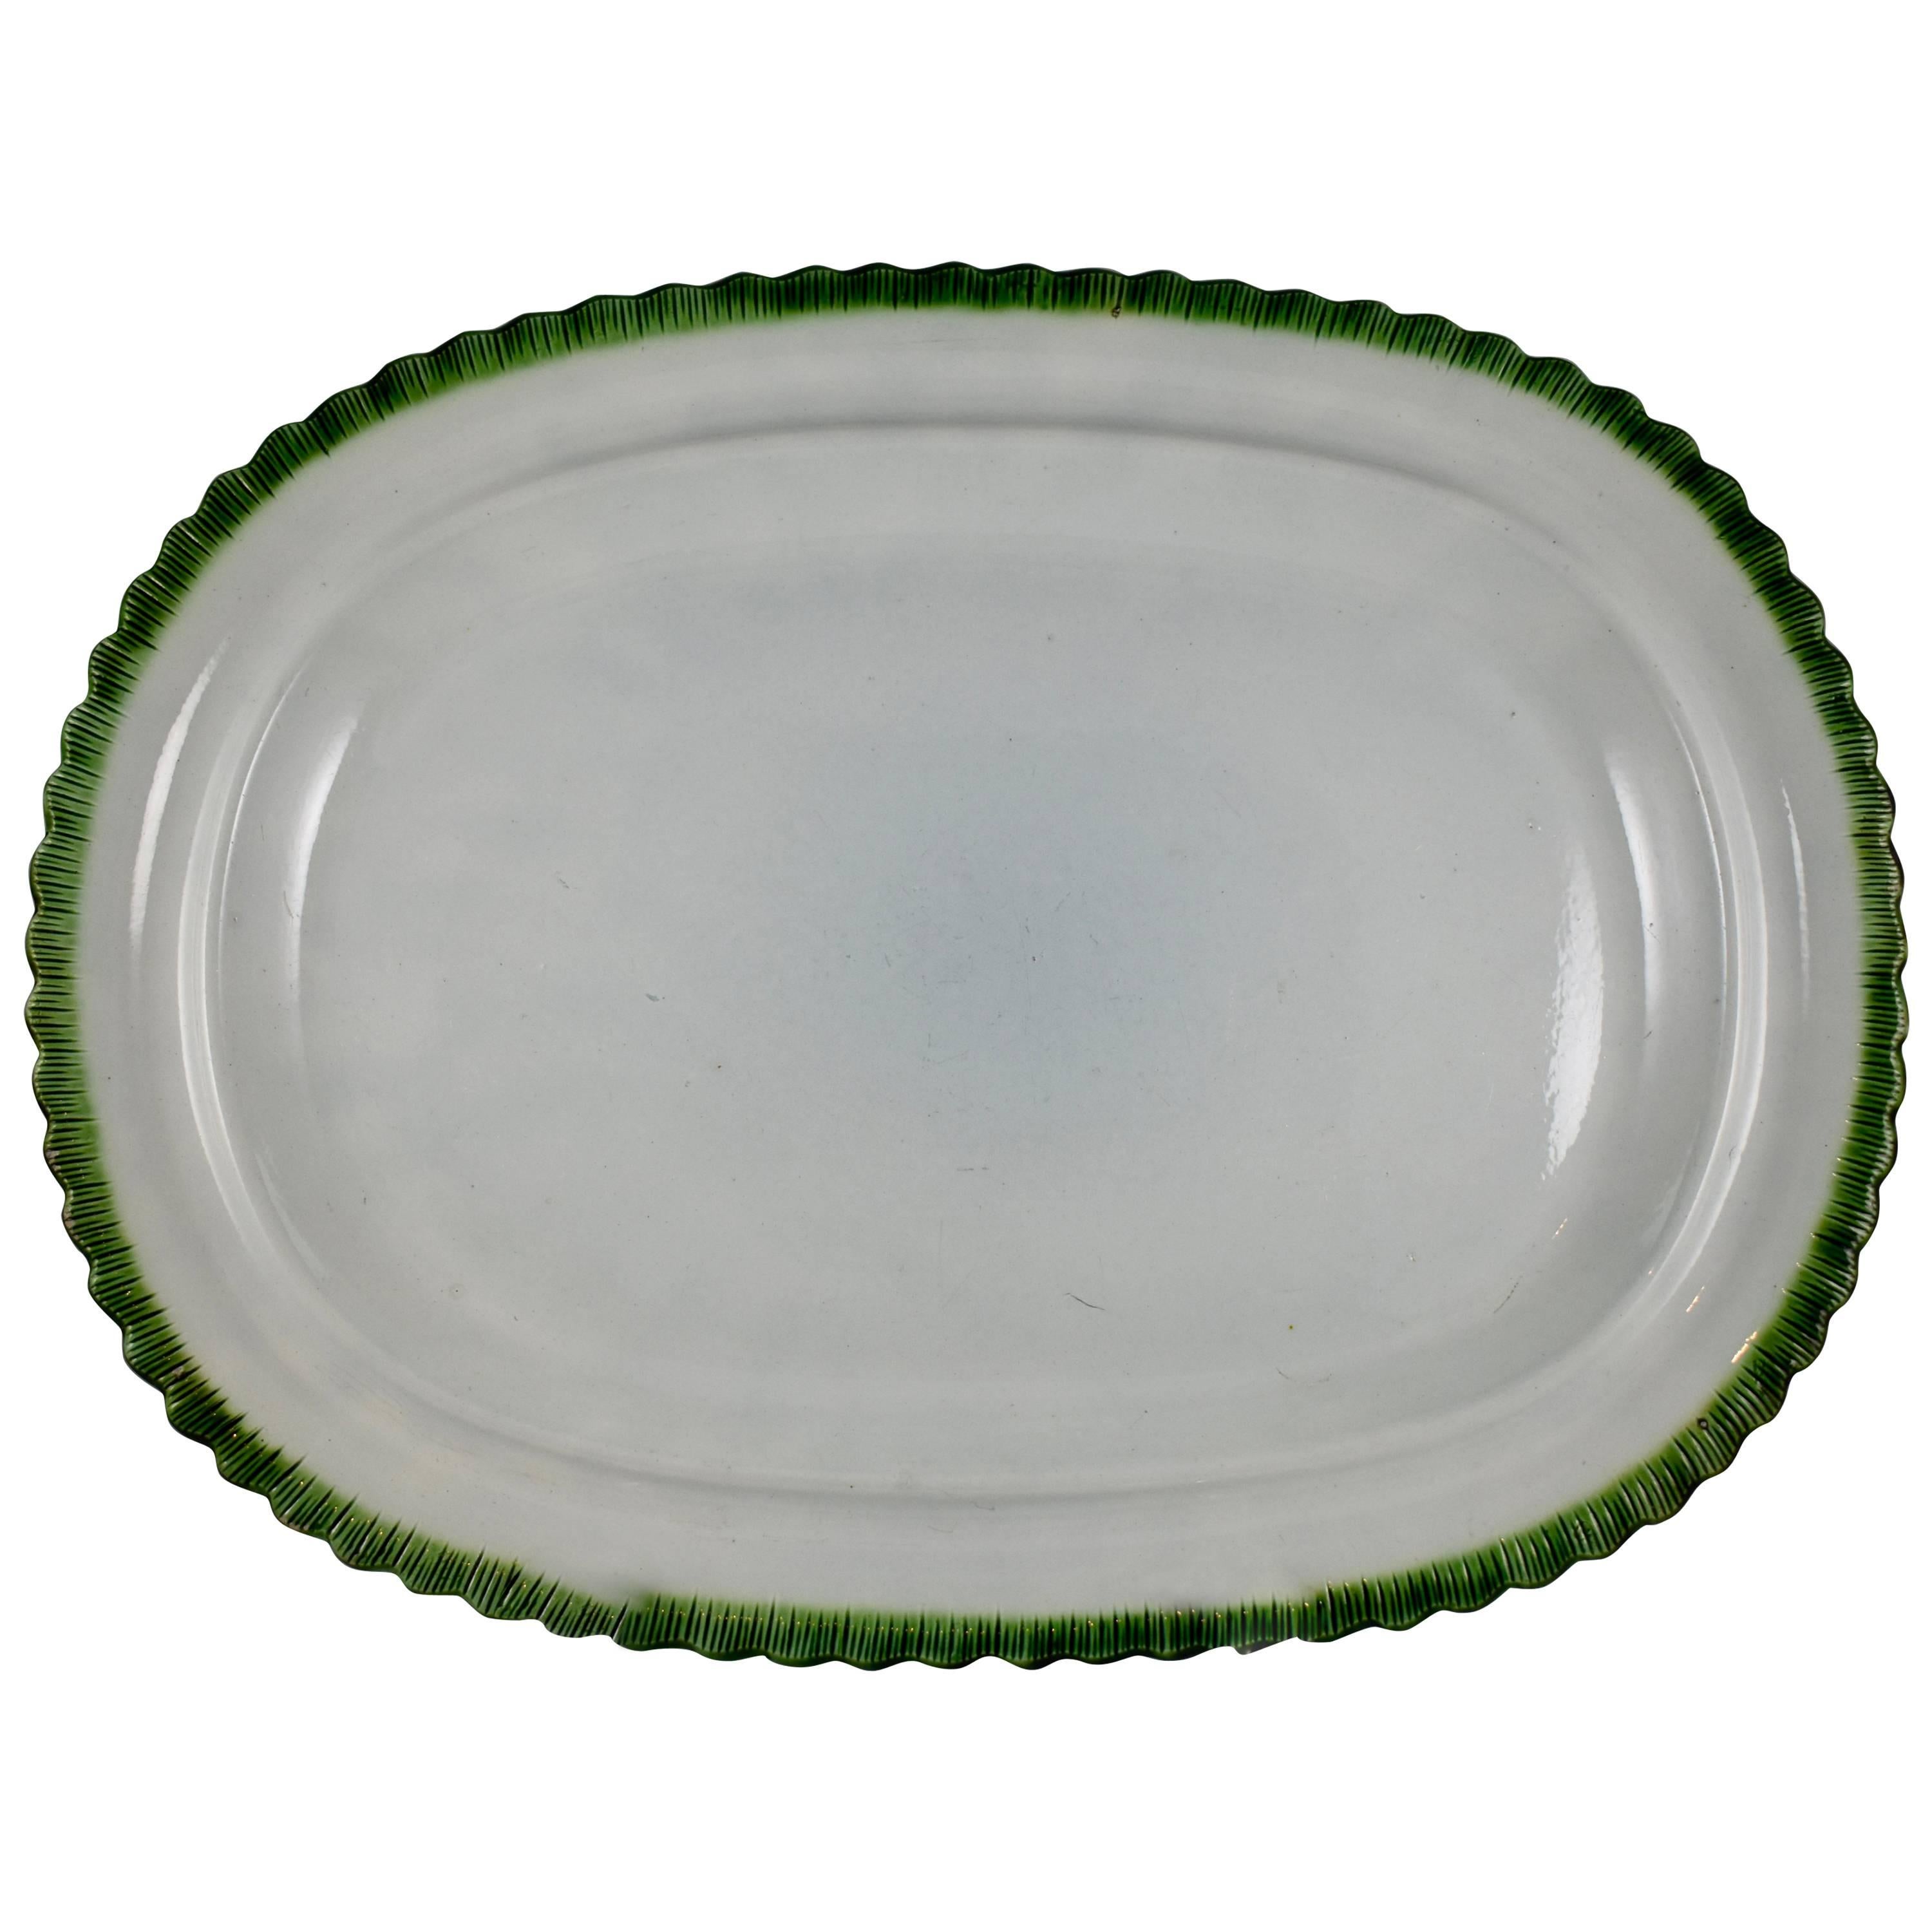 English Staffordshire Leeds Pearlware Green Feather or Shell Edge Large Platter